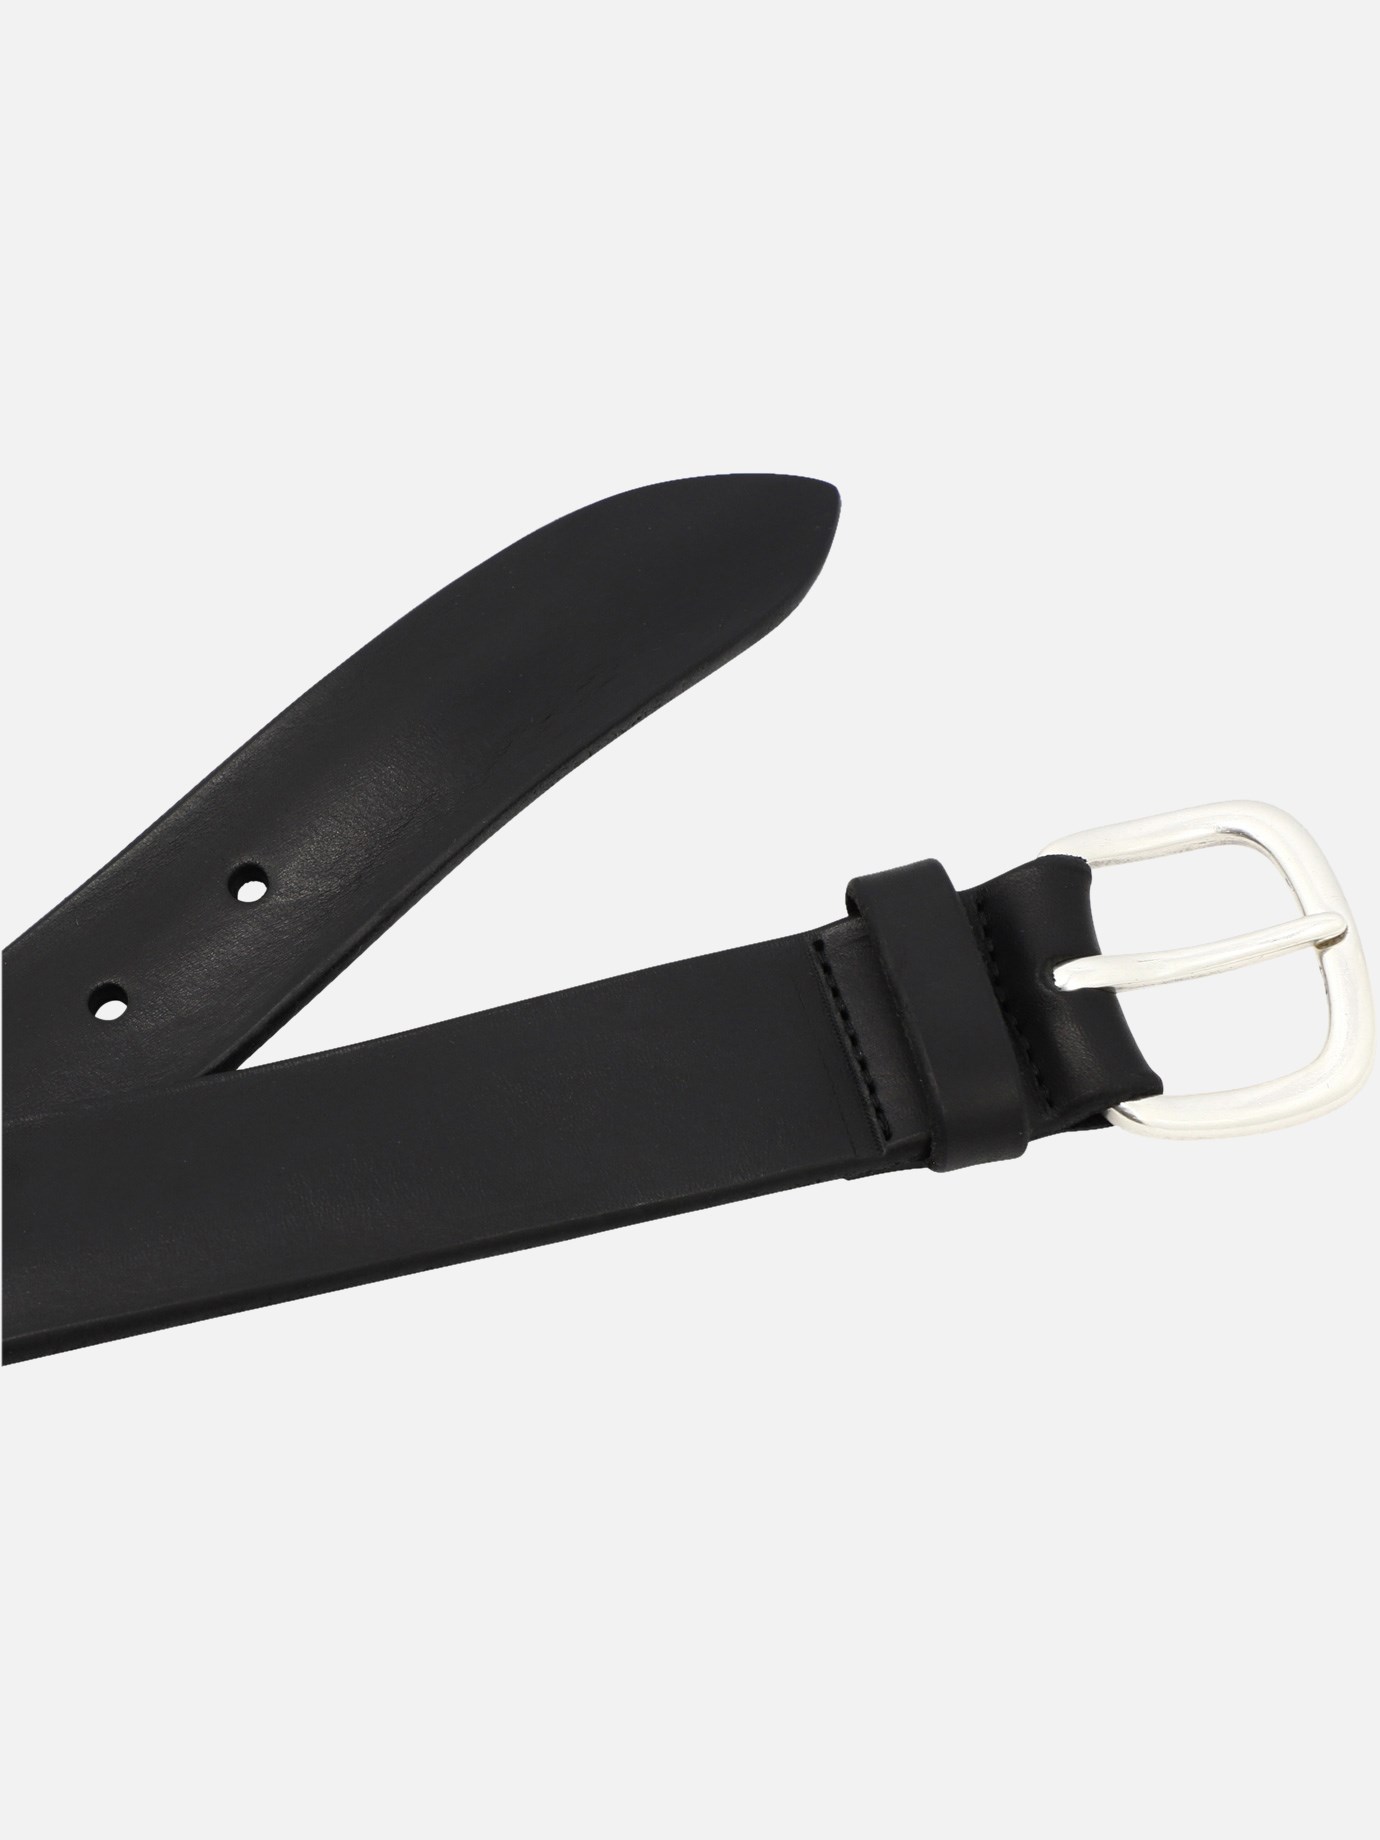  Bull Soft  belt by Orciani